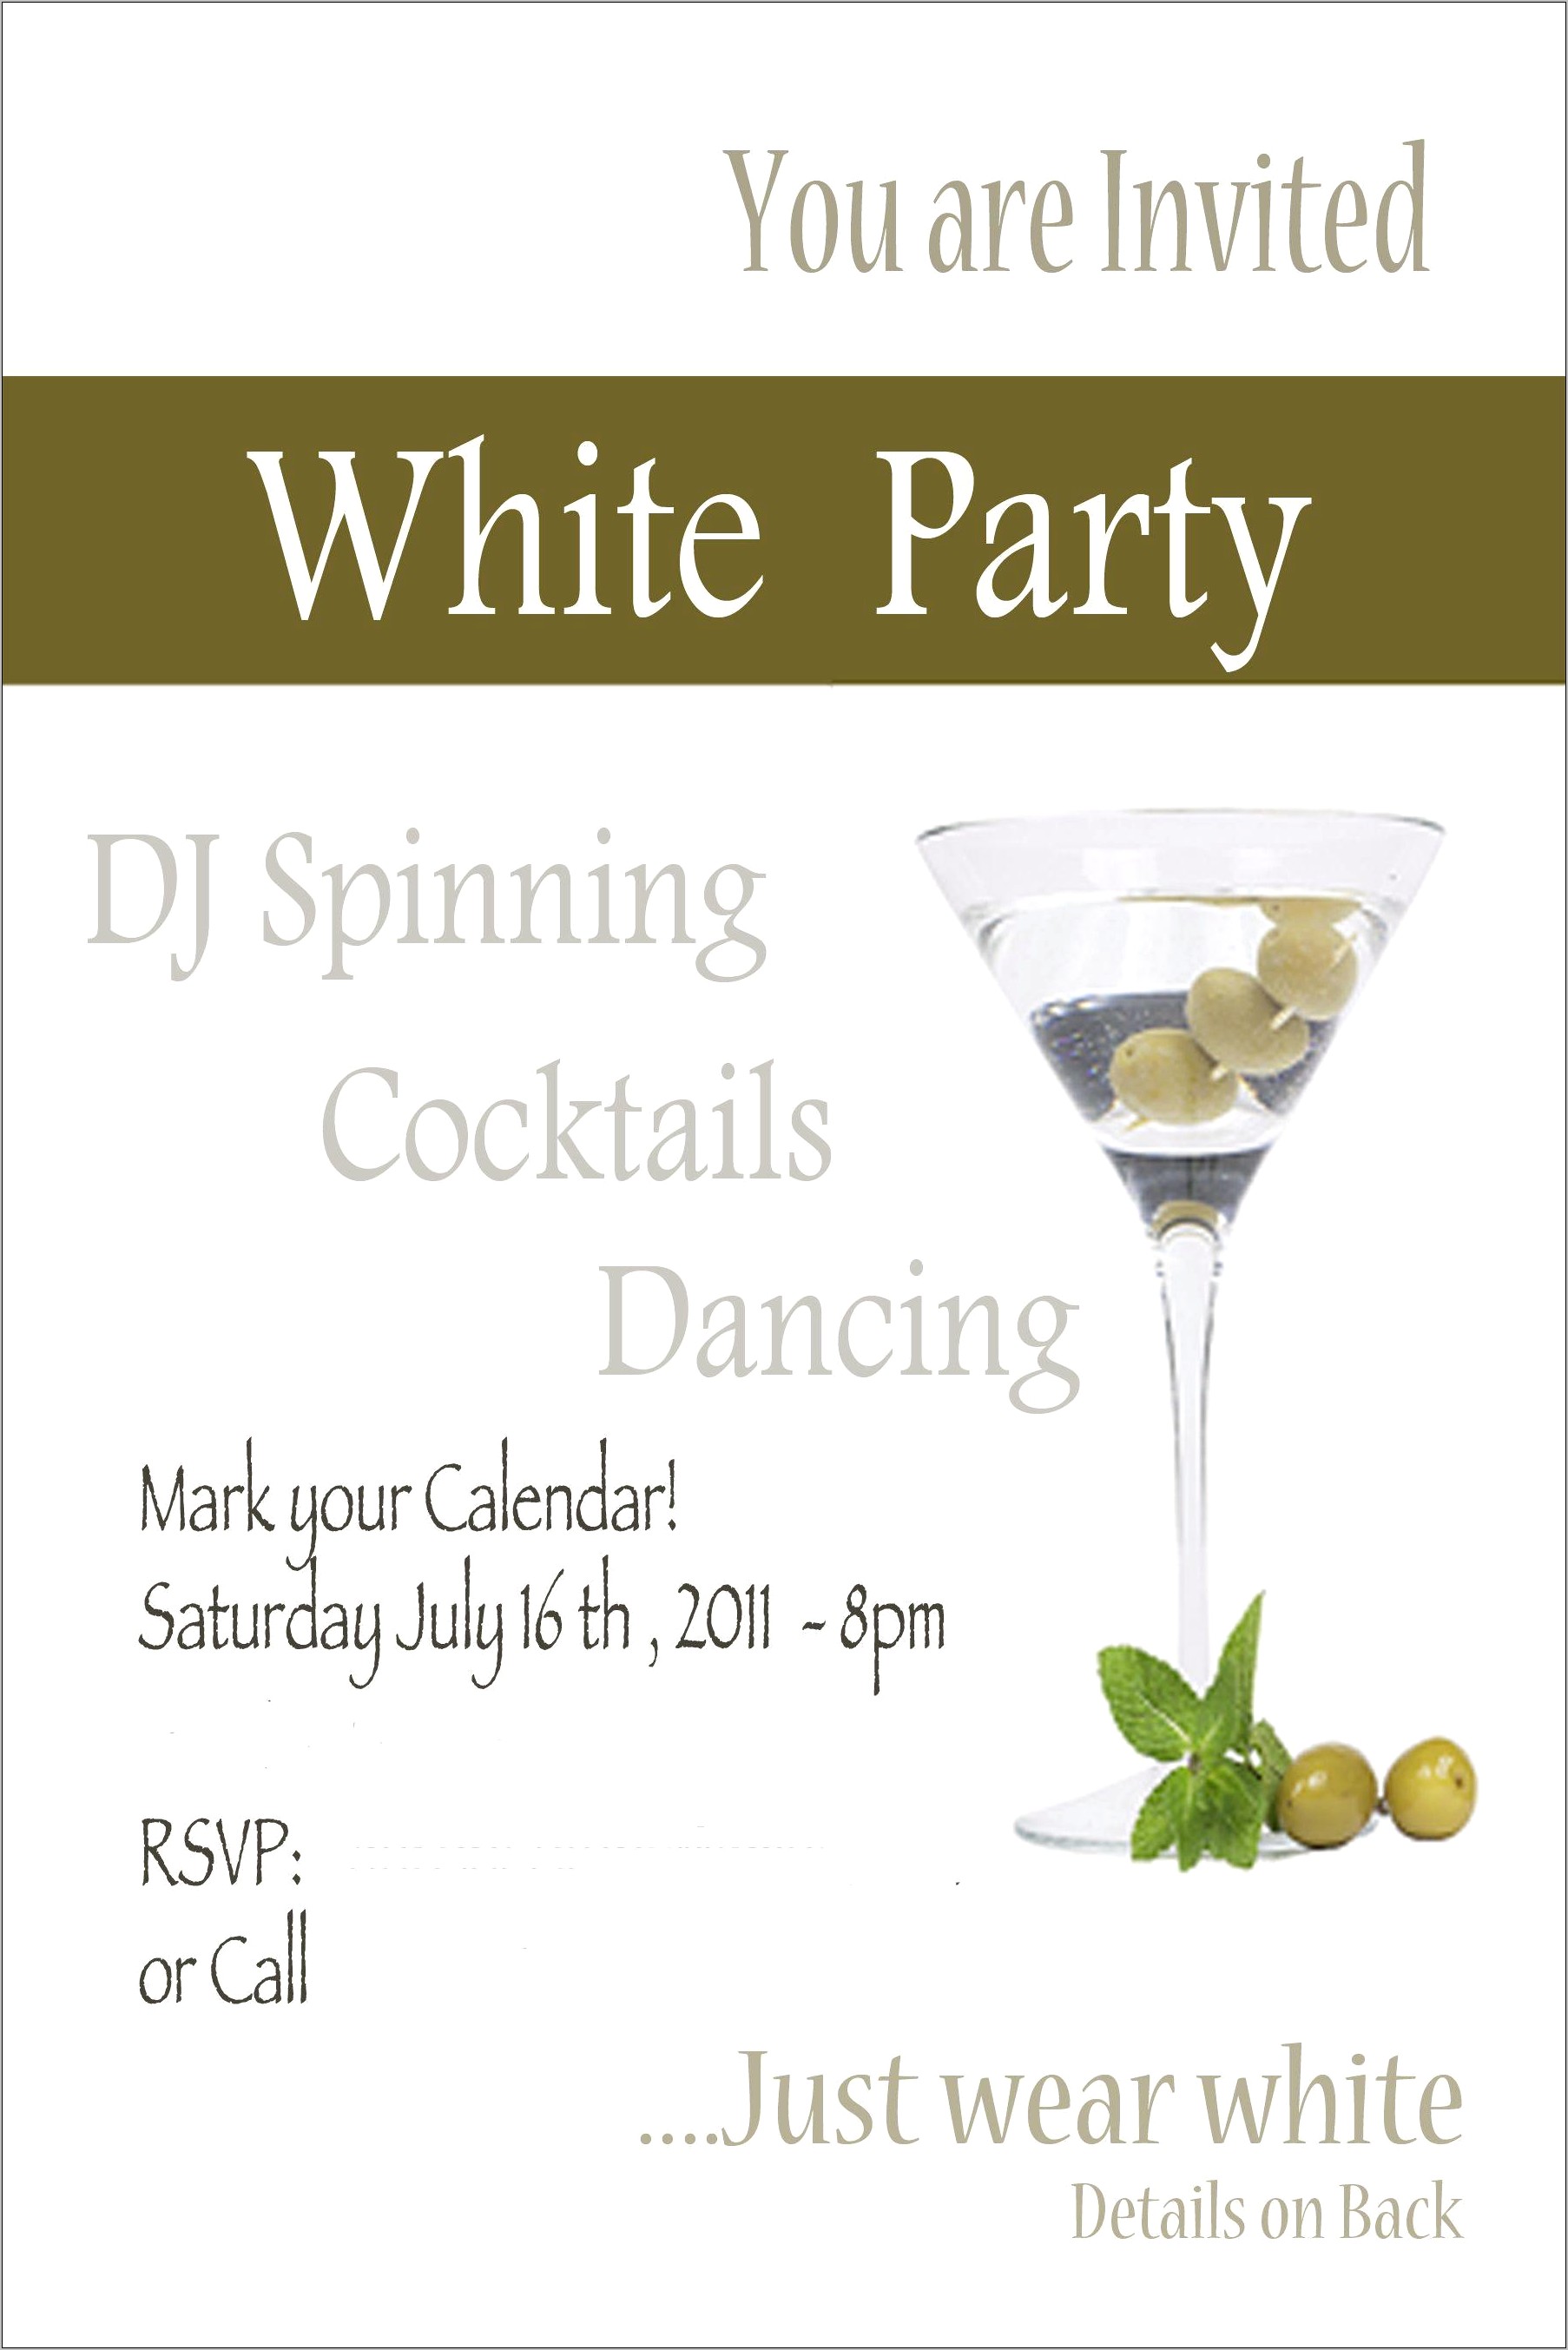 all-white-party-invitations-templates-free-resume-example-gallery